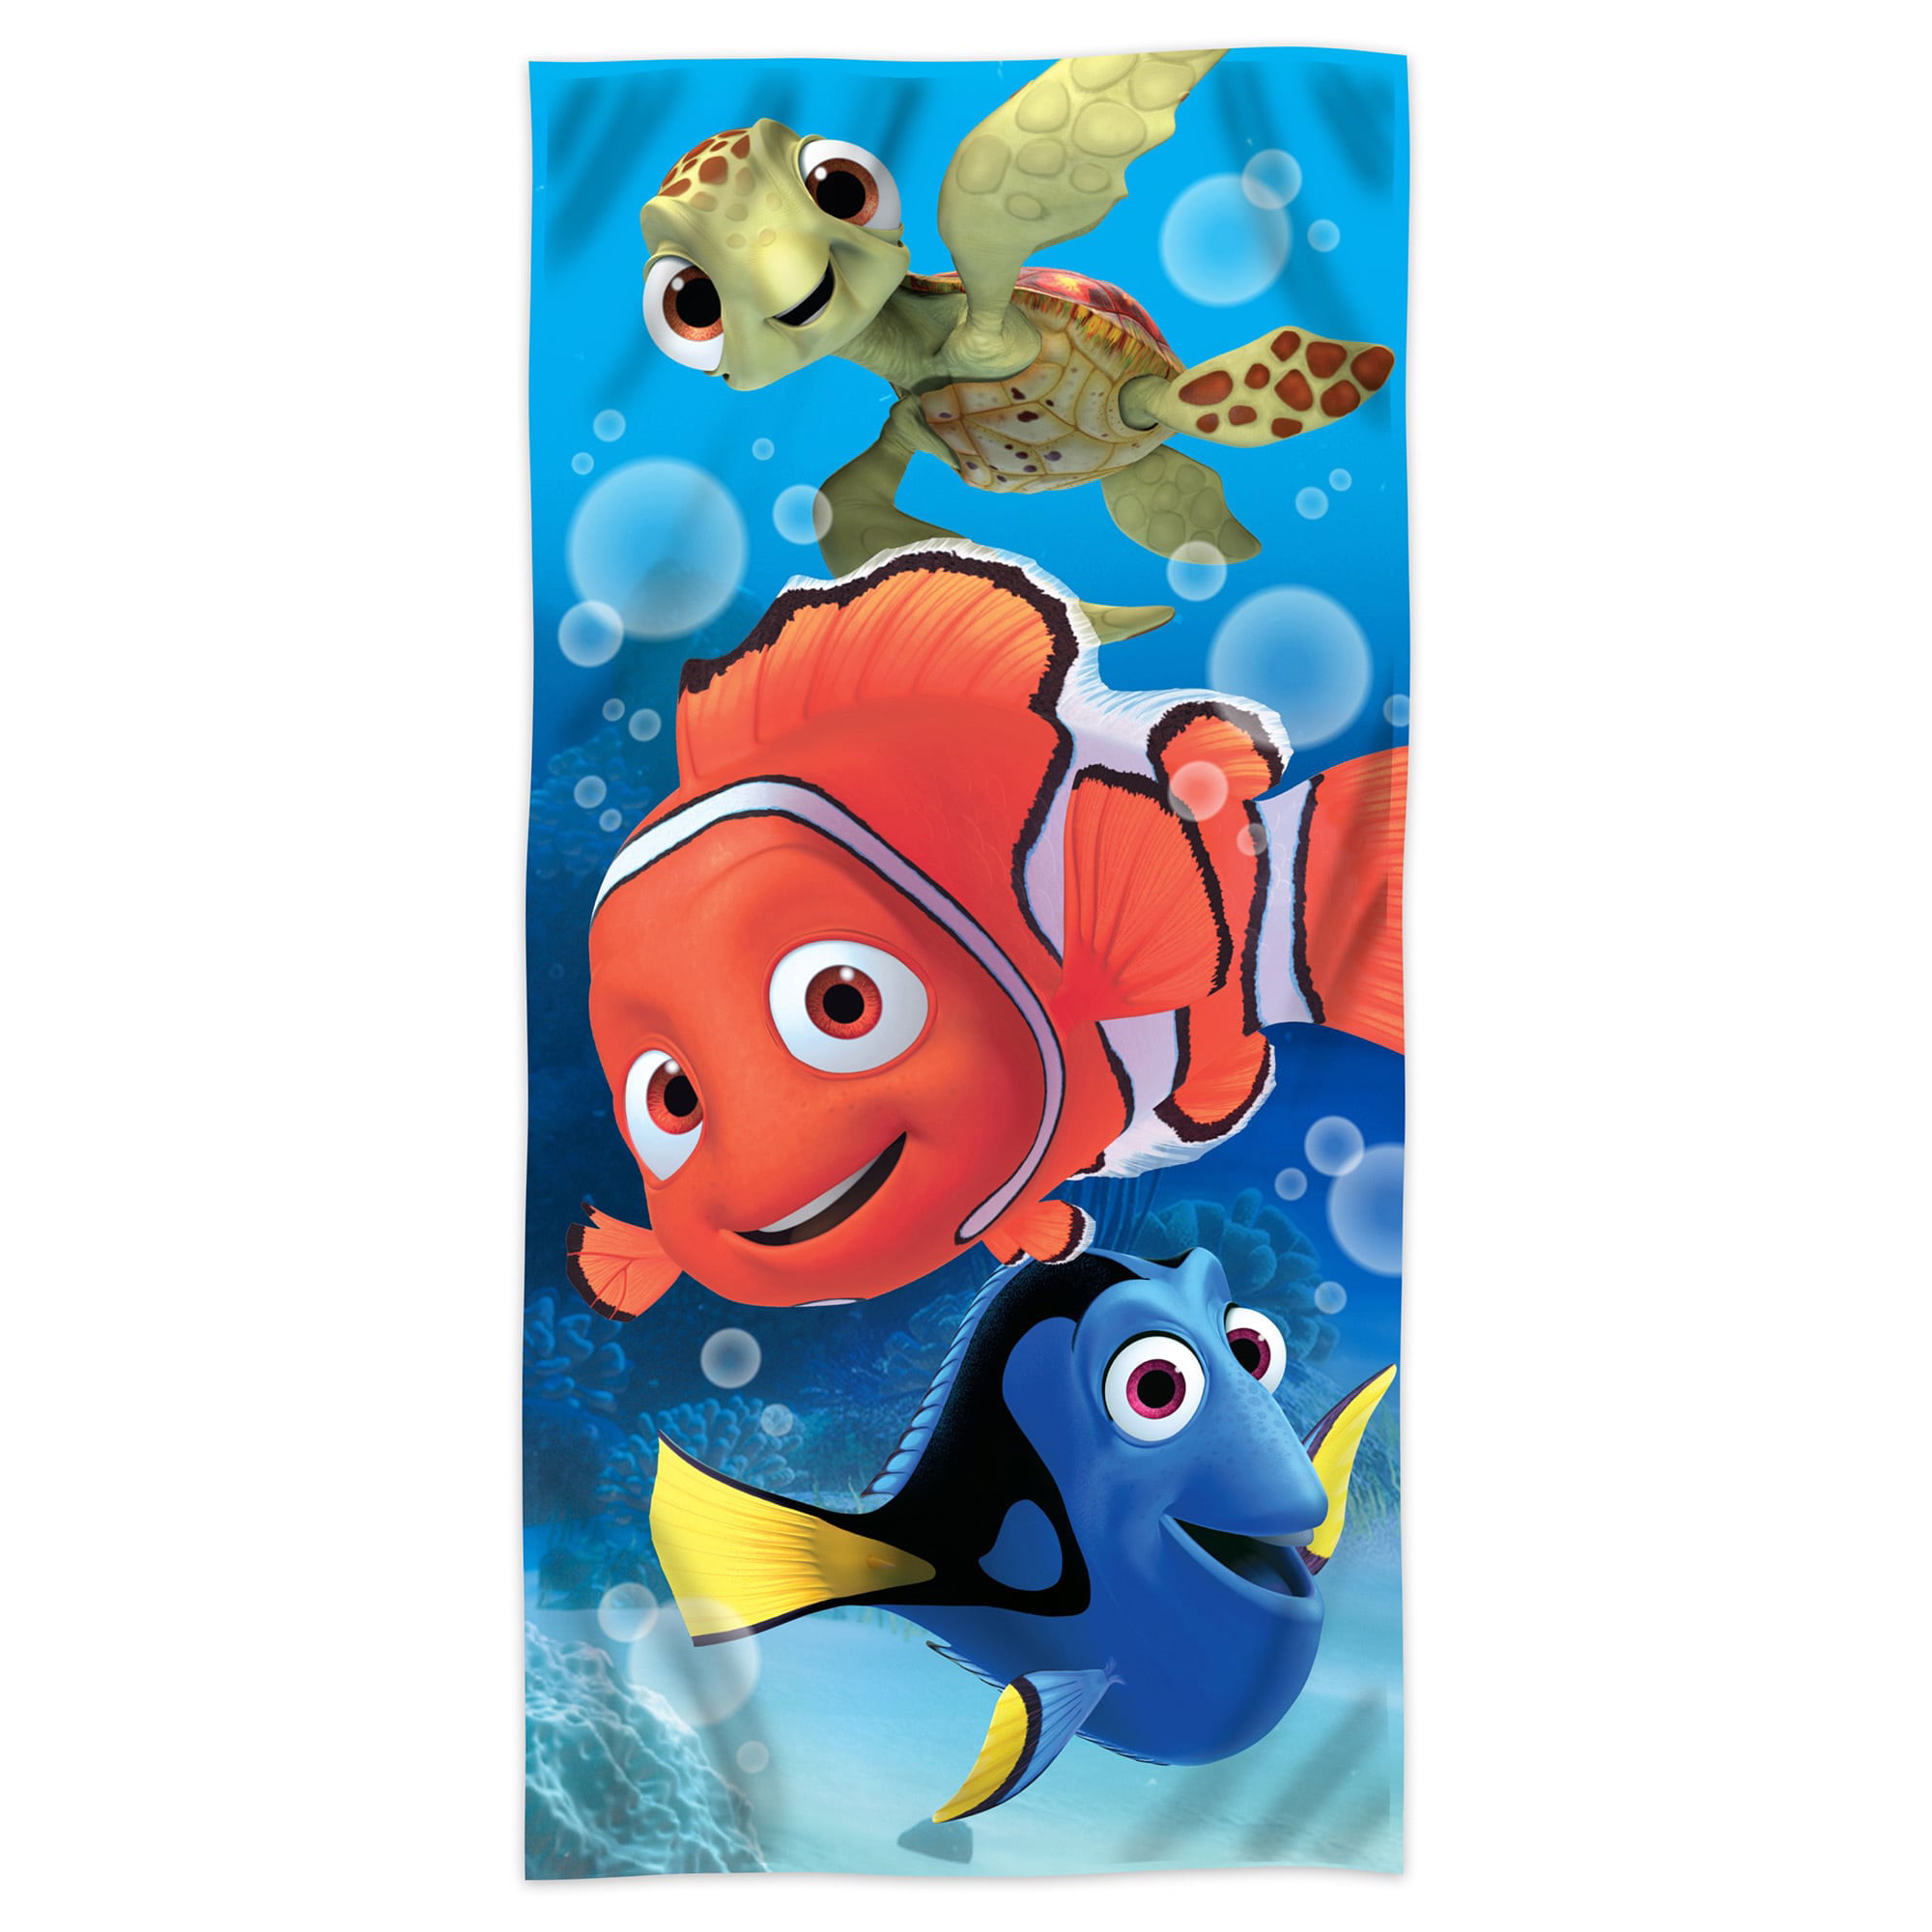 Sling Backpack Bag NEW Details about   DISNEY Finding Dory Nemo Bath Pool Beach Towel 28"X58" 